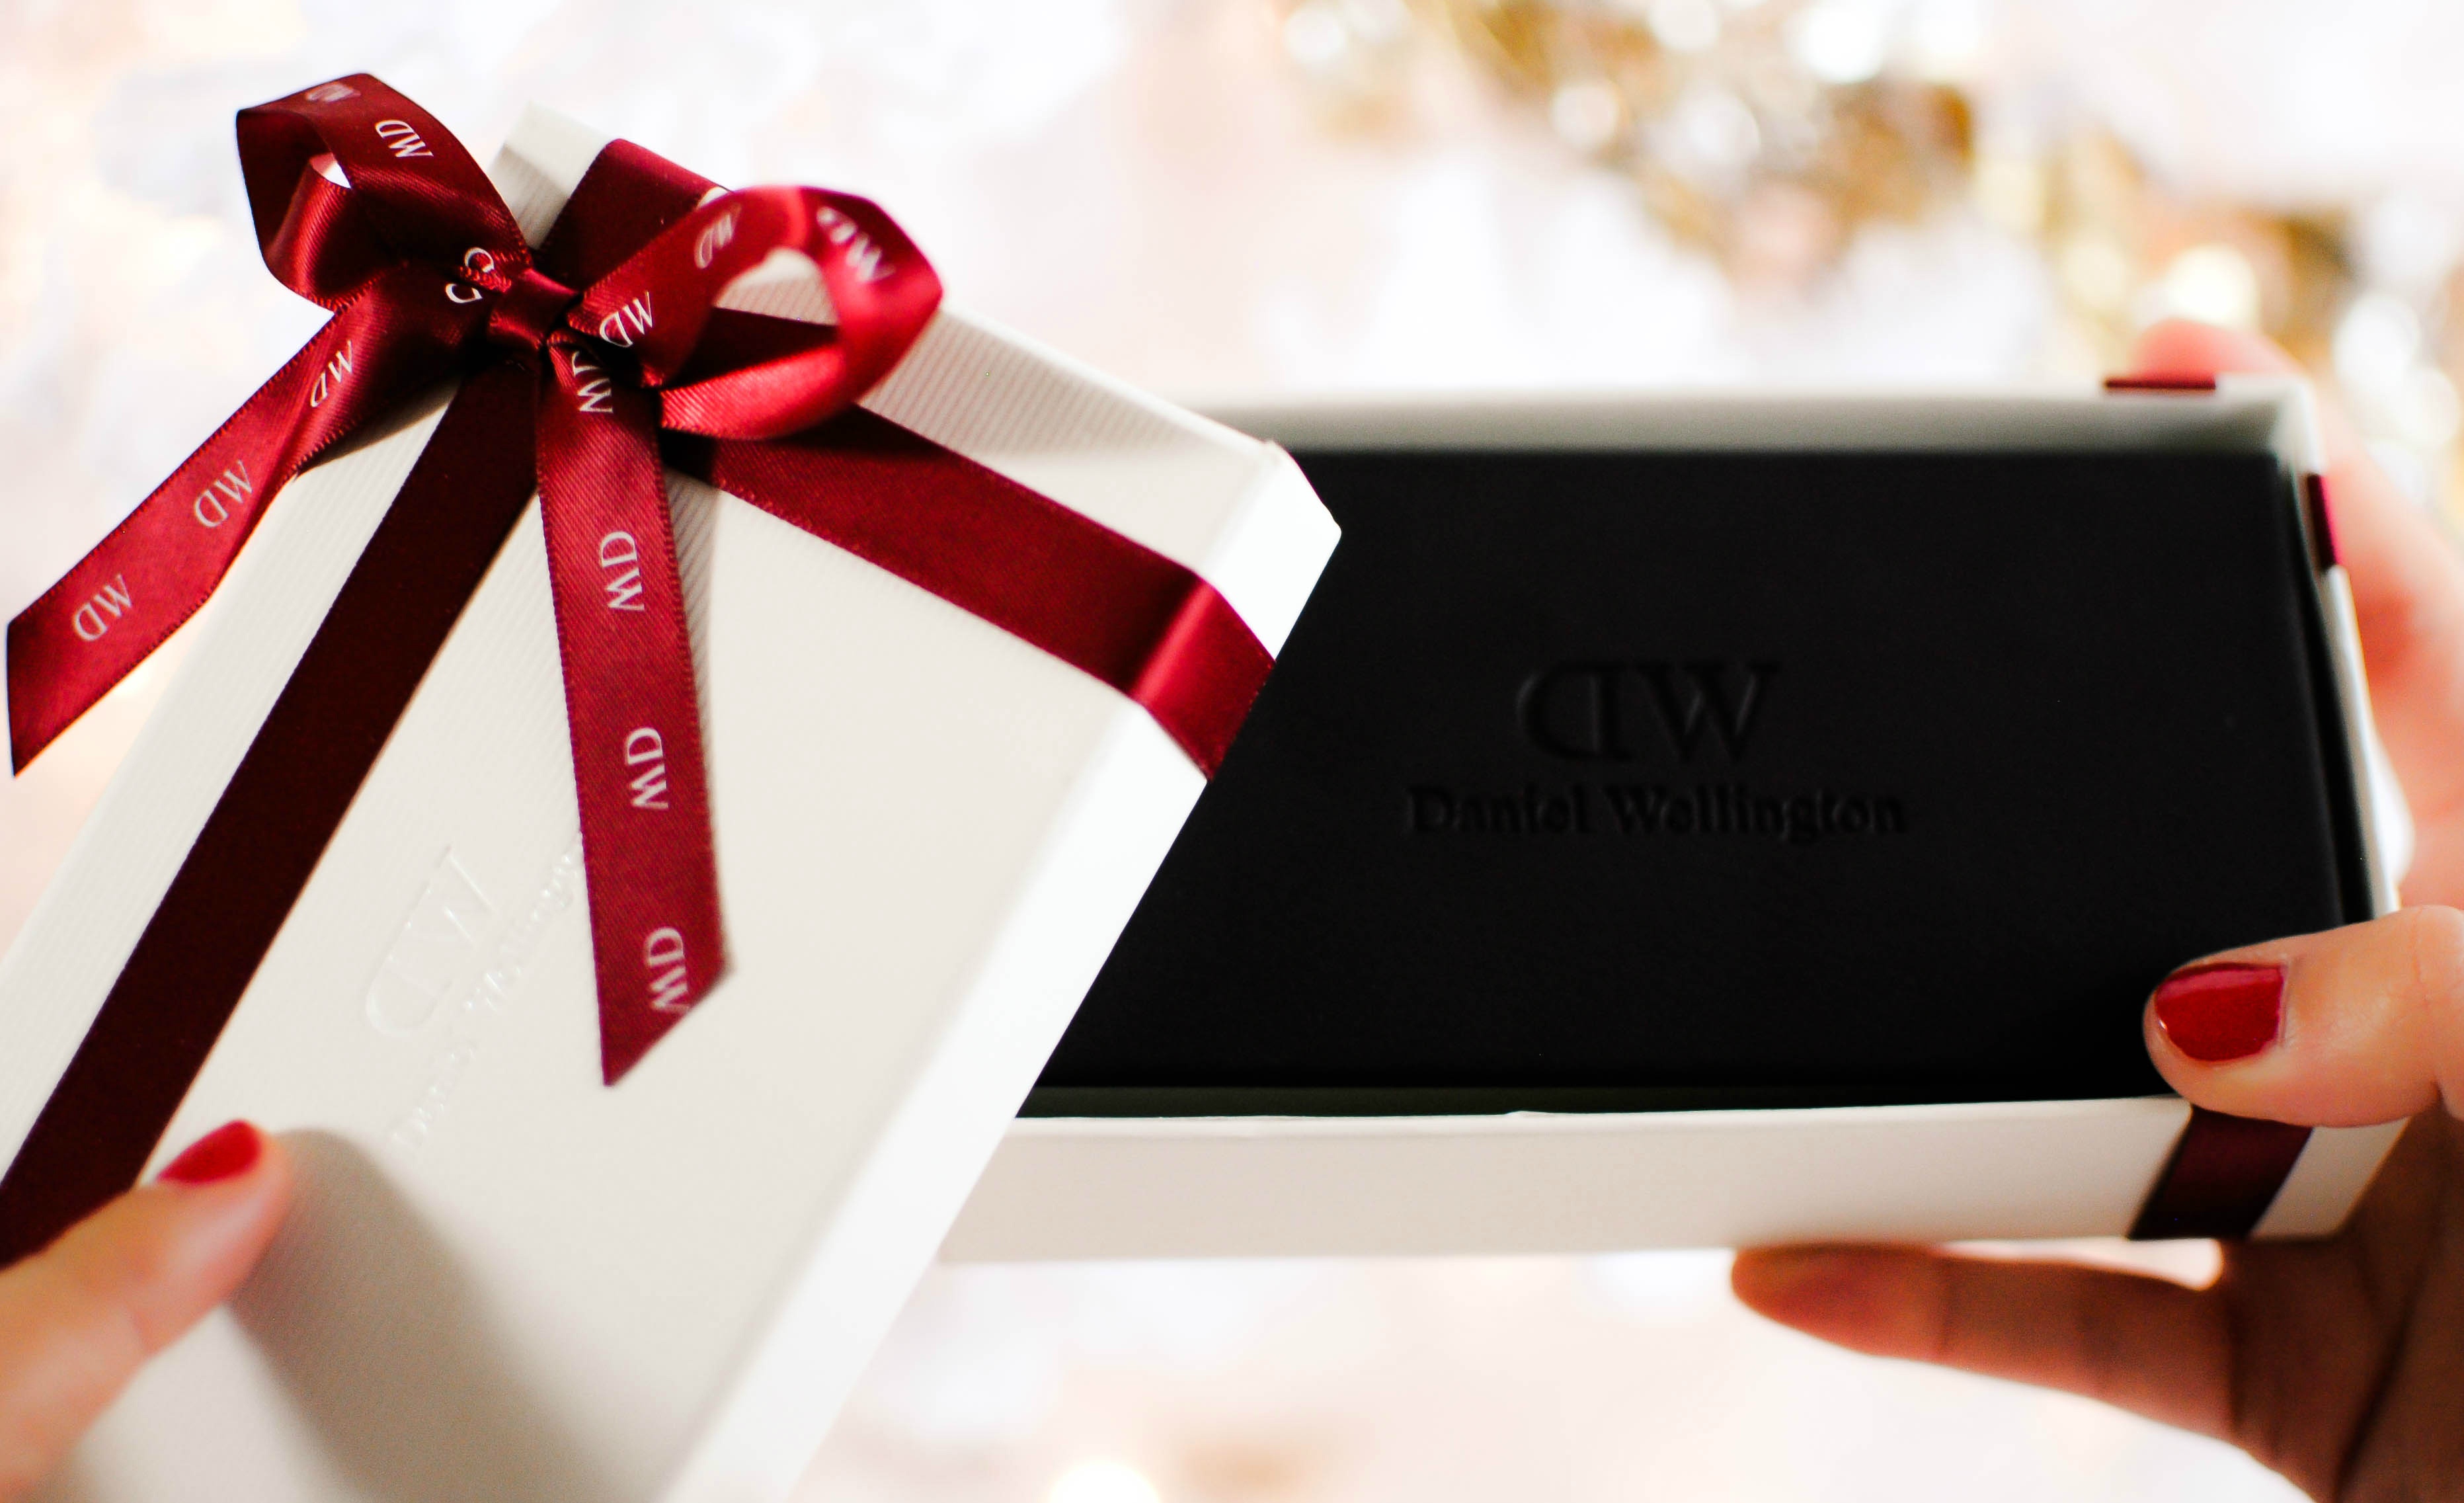 vanessa-lambert-blogger-behind-what-would-v-wear-wears-the-perfect-holiday-gift-a-classic-black-daniel-wellington-watch-_2